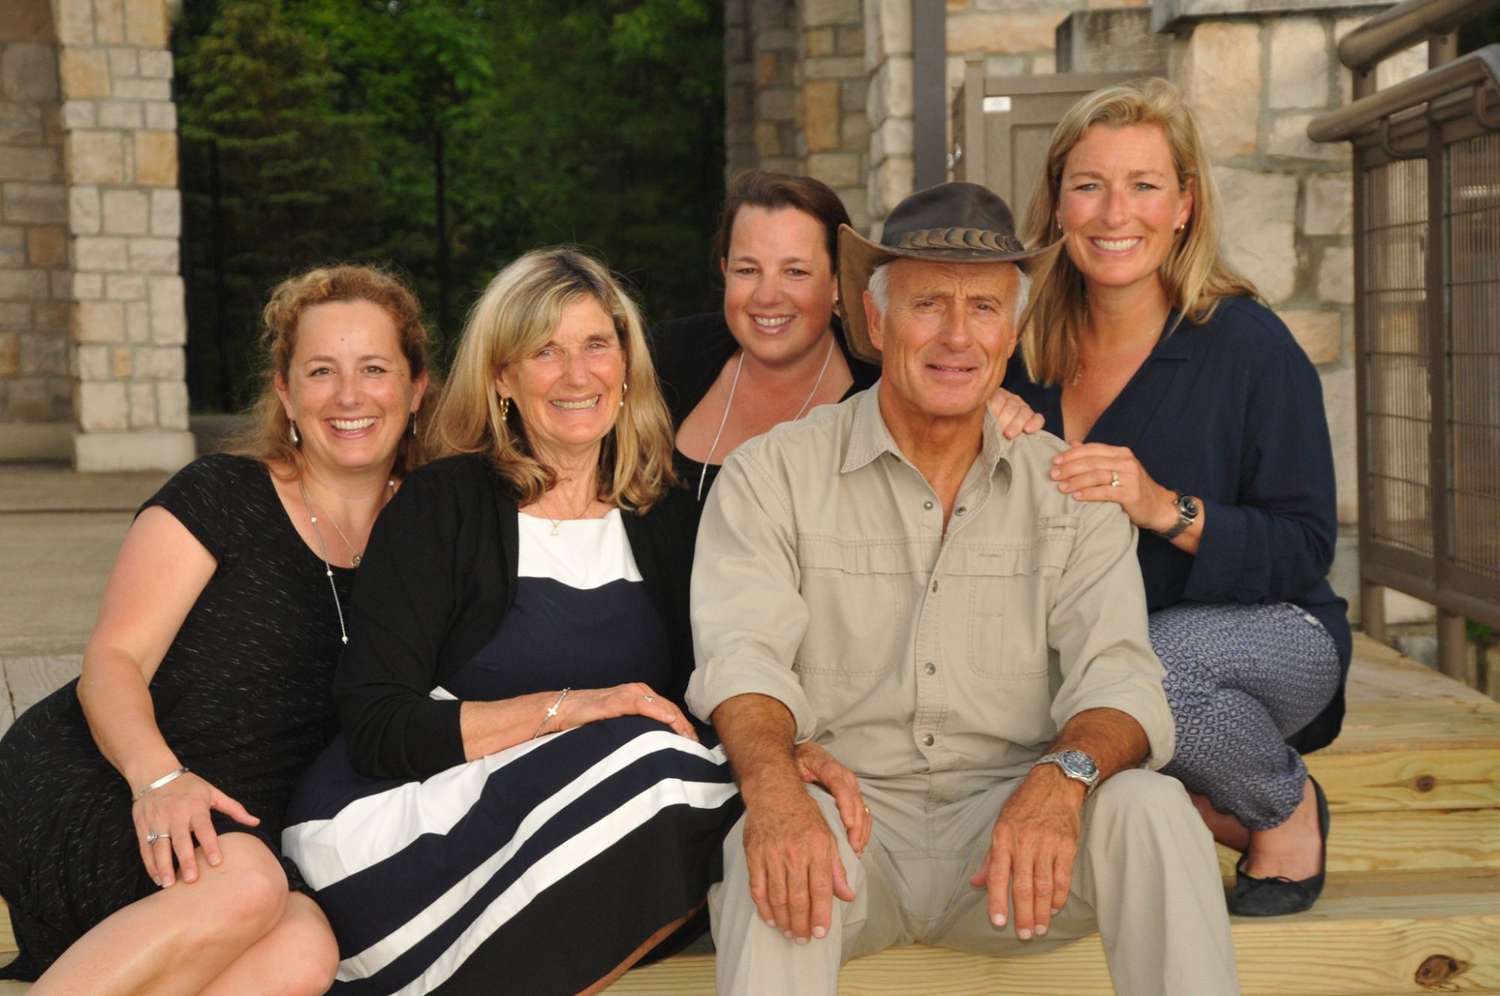 Jack Hanna Has Advanced Alzheimer's: A Tragic Tale of a Beloved Zookeeper and His Family 15